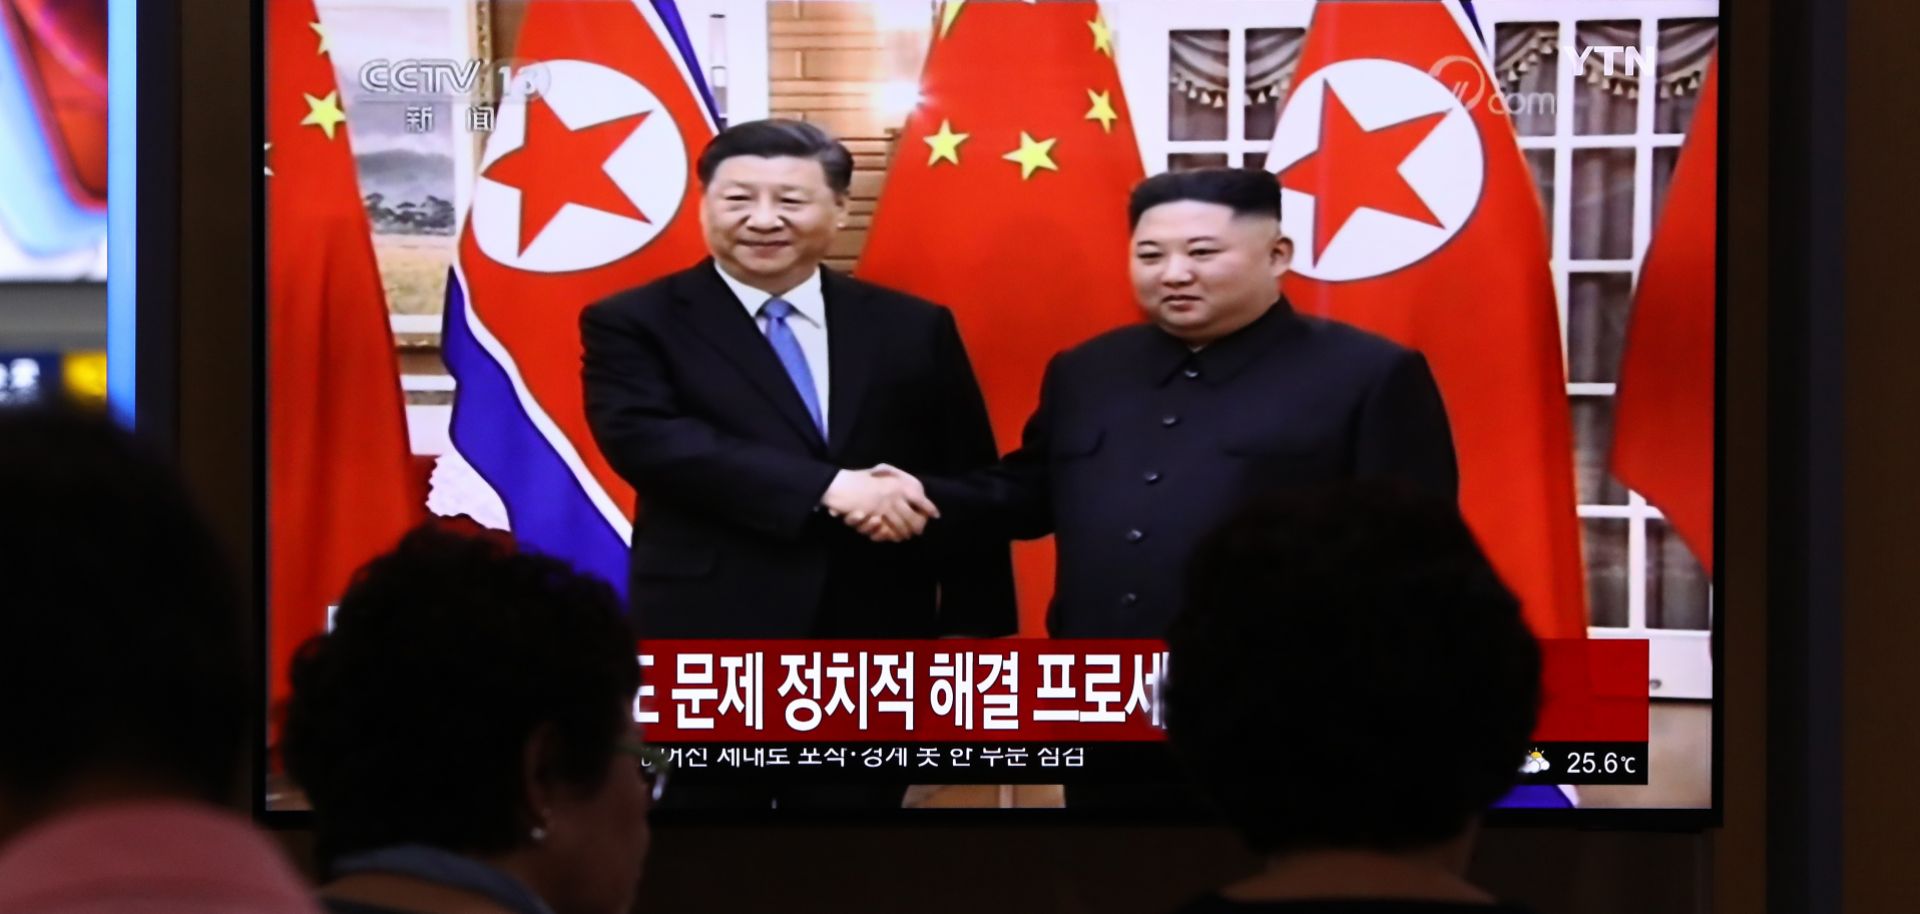 Chinese President Xi Jinping and North Korean leader Kim Jong Un are shown on a railway television monitor in Seoul, South Korea, on June 20, 2019.